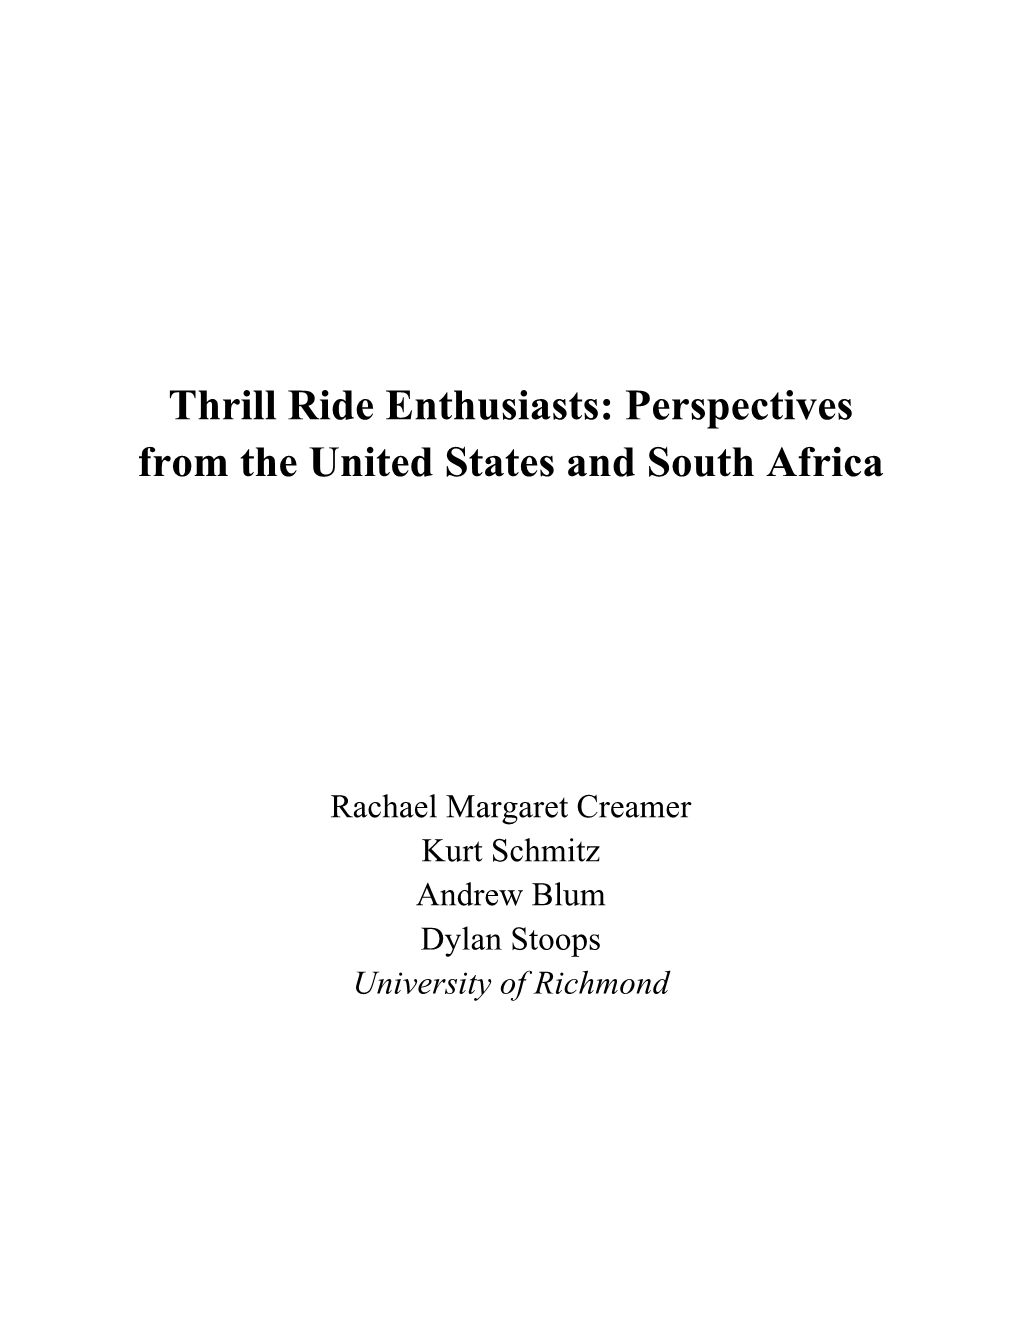 Thrill Ride Enthusiasts: Perspectives from the United States and South Africa